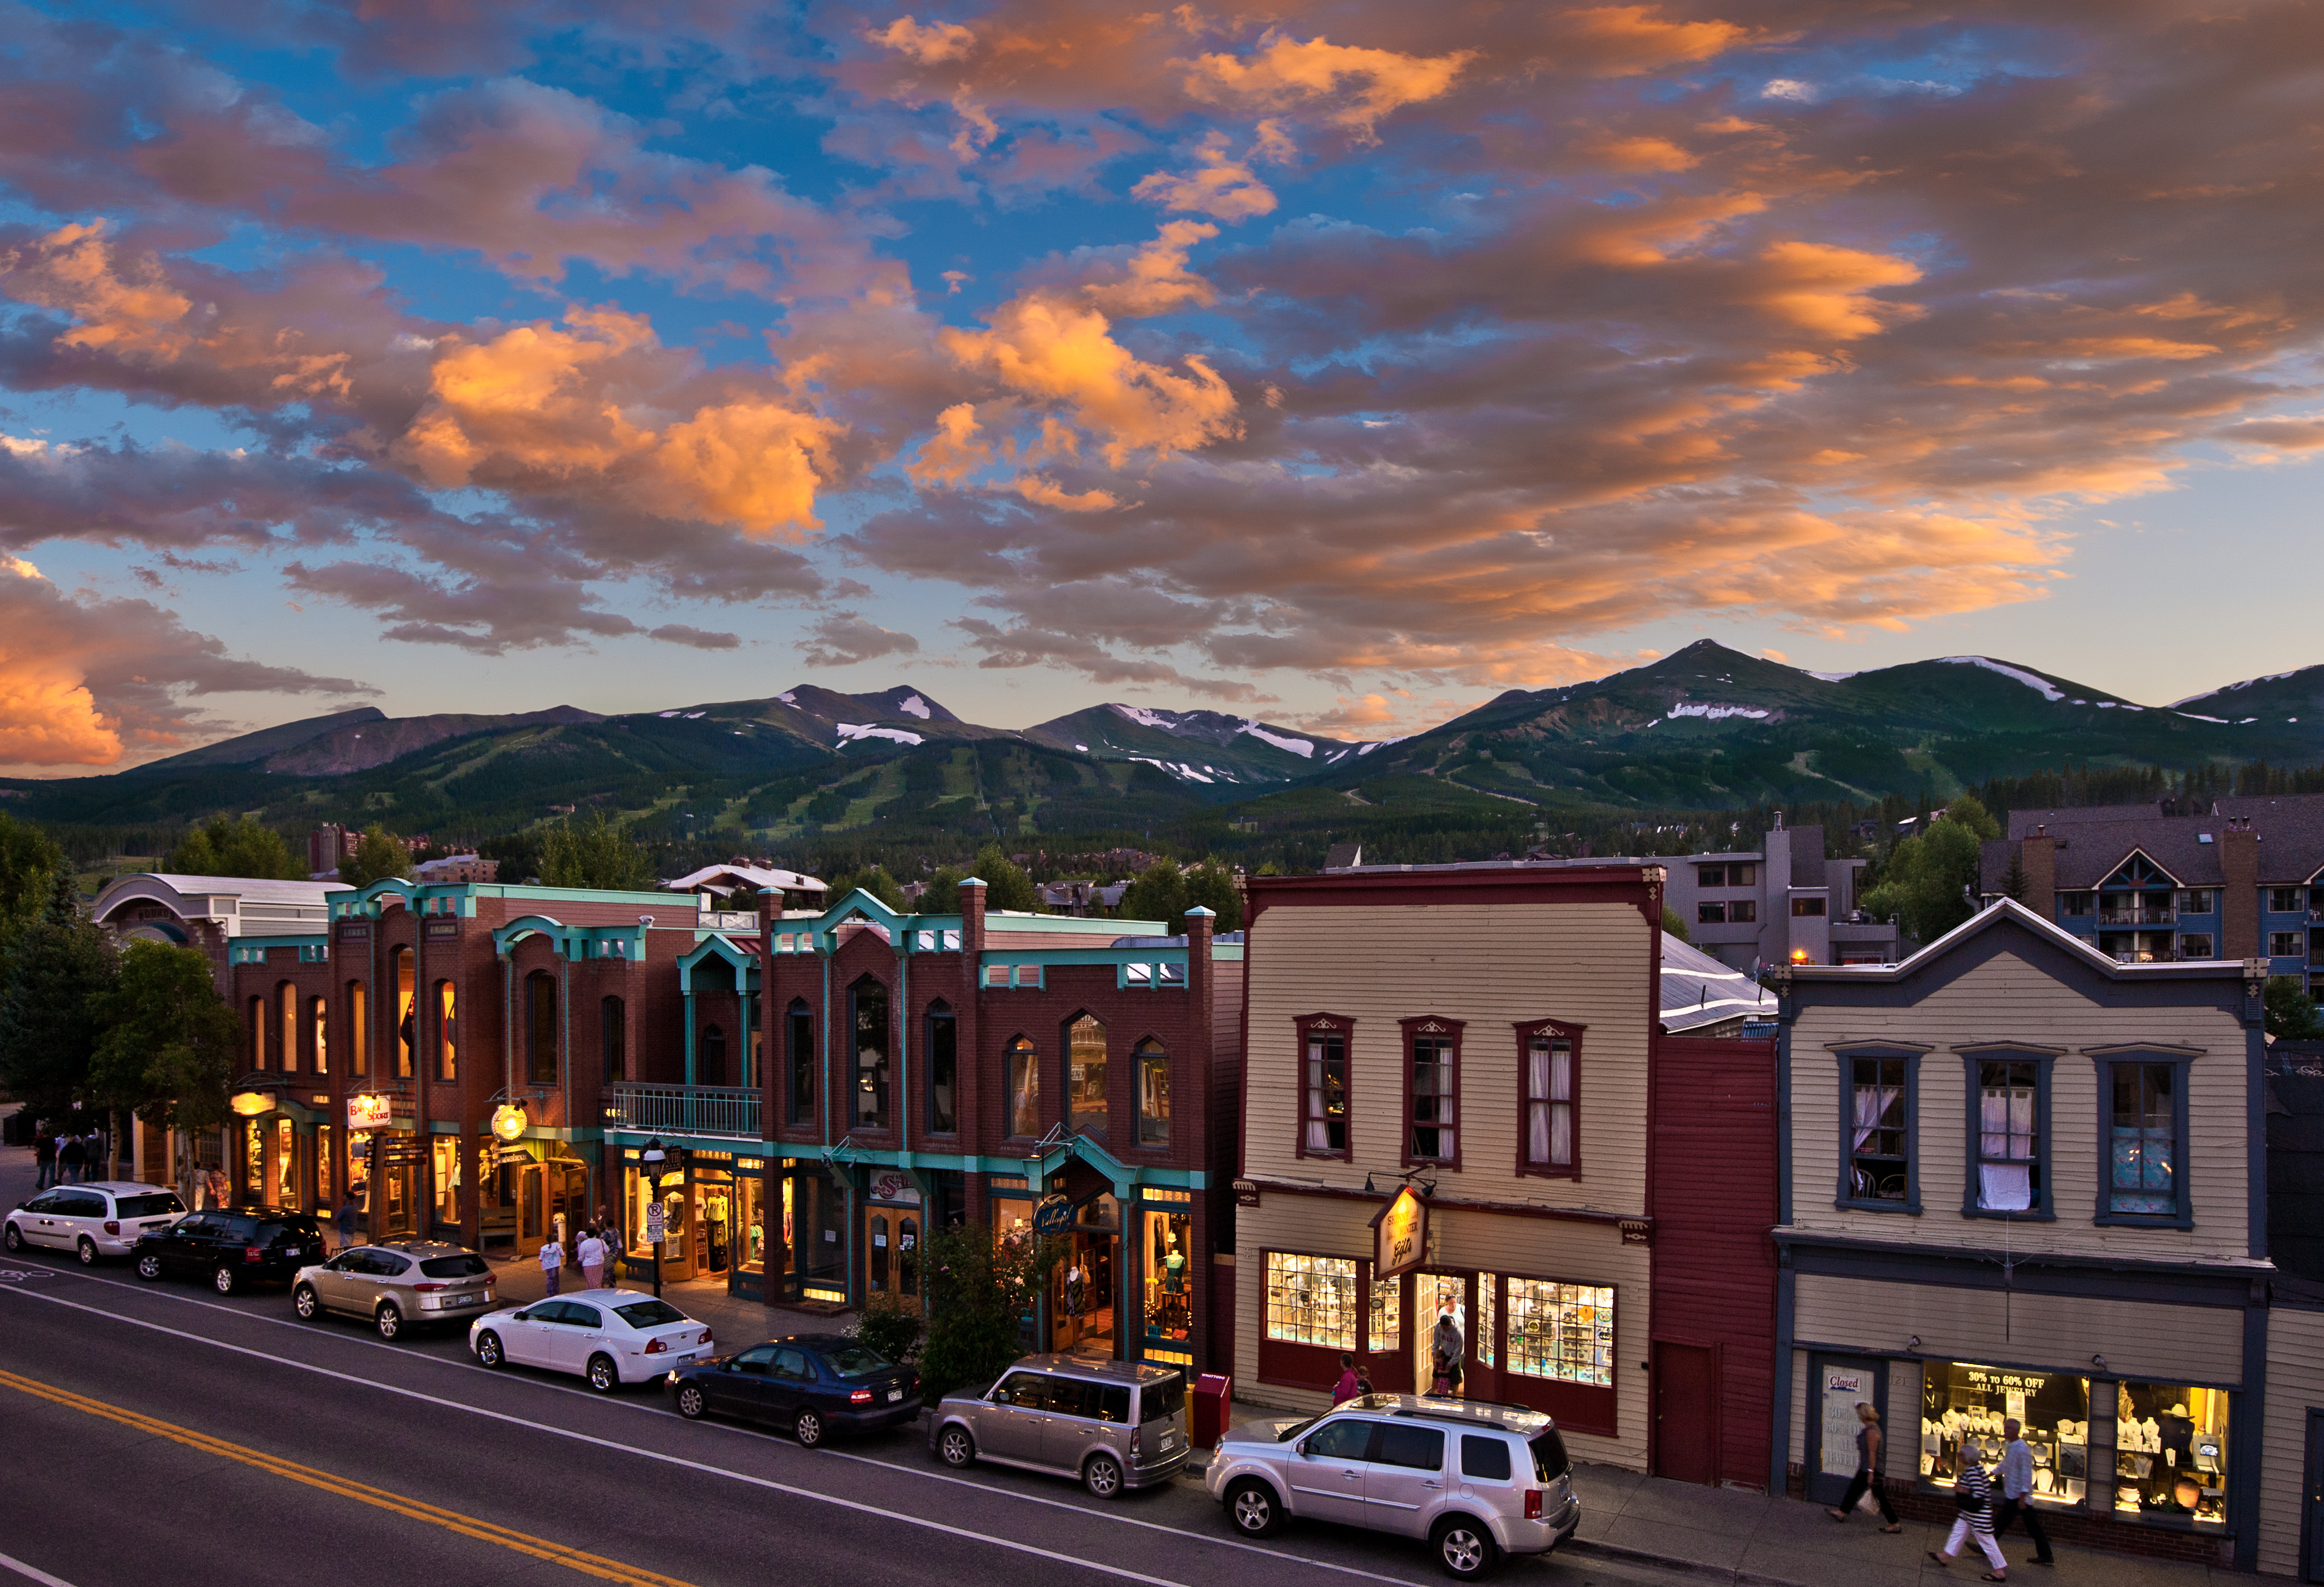 Town at Dusk In Breckenridge, CO.